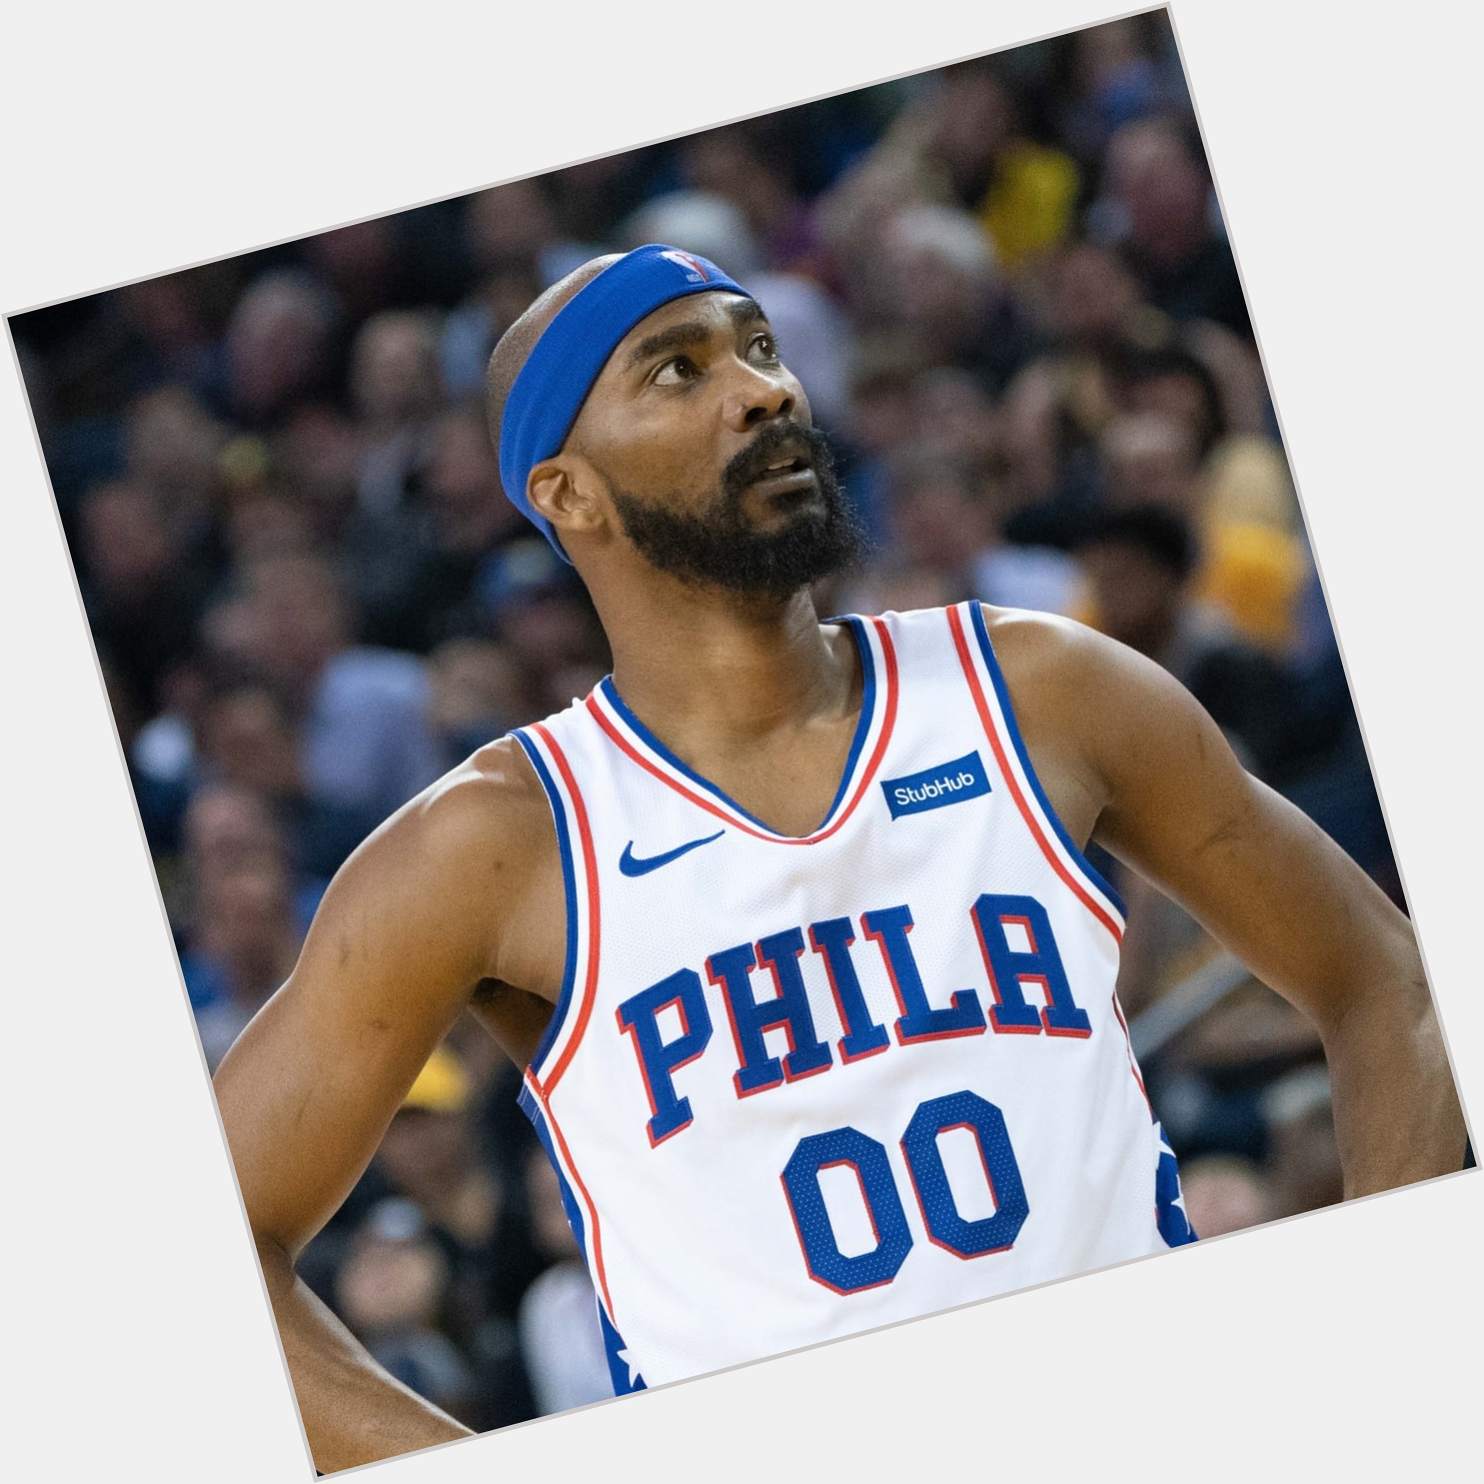 <a href="/hot-men/corey-brewer/where-dating-news-photos">Corey Brewer</a> Athletic body,  black hair & hairstyles